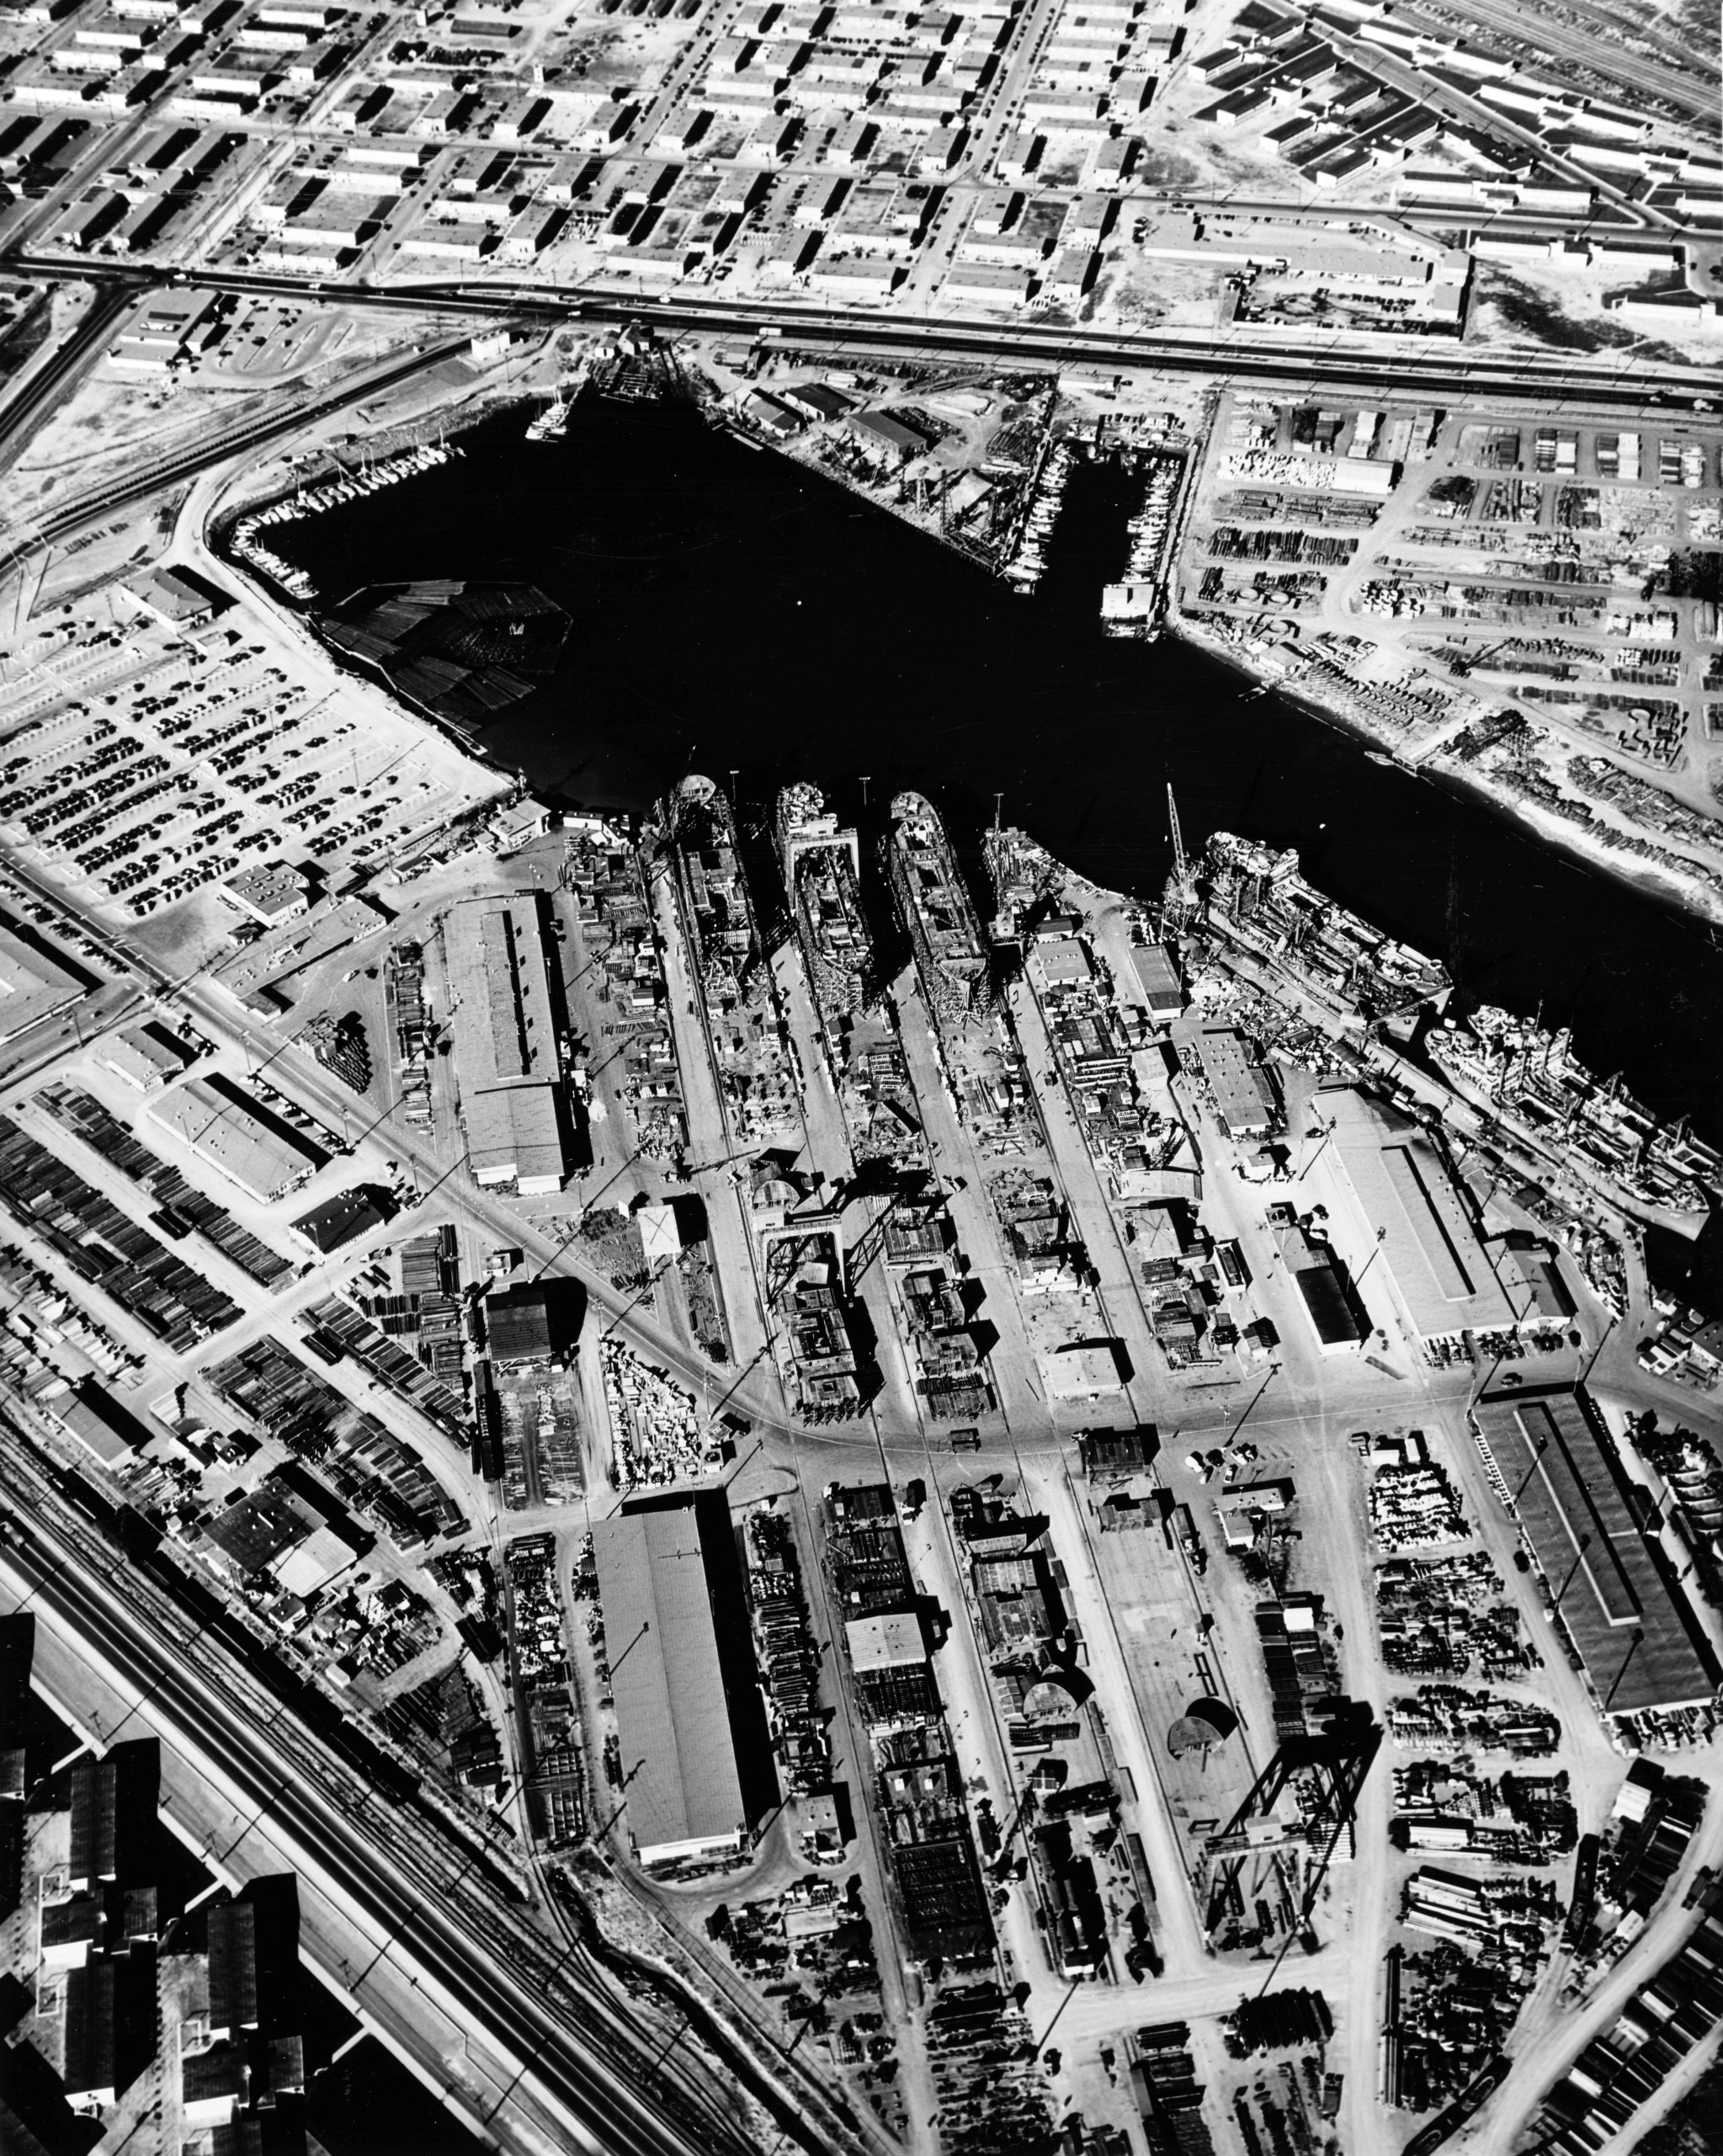 Aerial view of the Kaiser Company Shipyard No. 4 looking north, Richmond, California, United States, 6 Dec 1944.